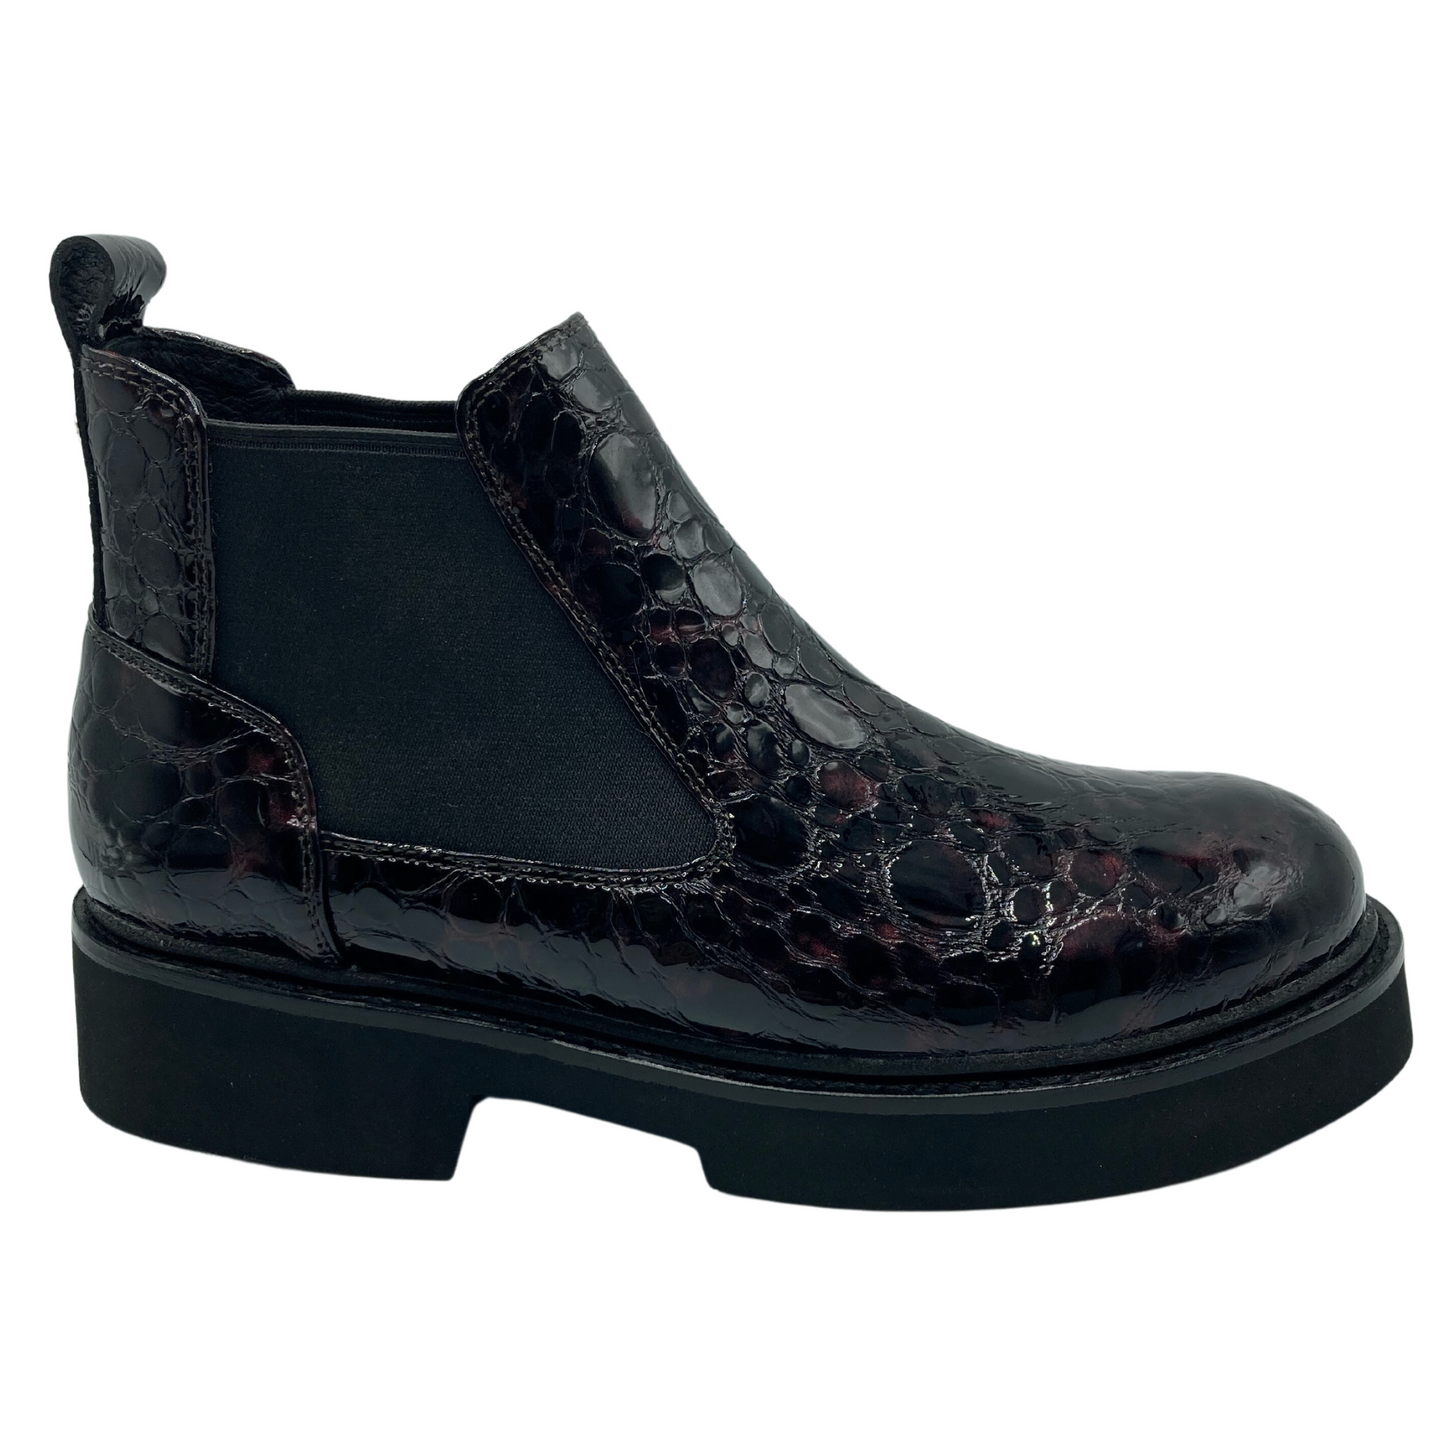 Right facing view of textured leather ankle boot with black elastic double gore with black rubber sole